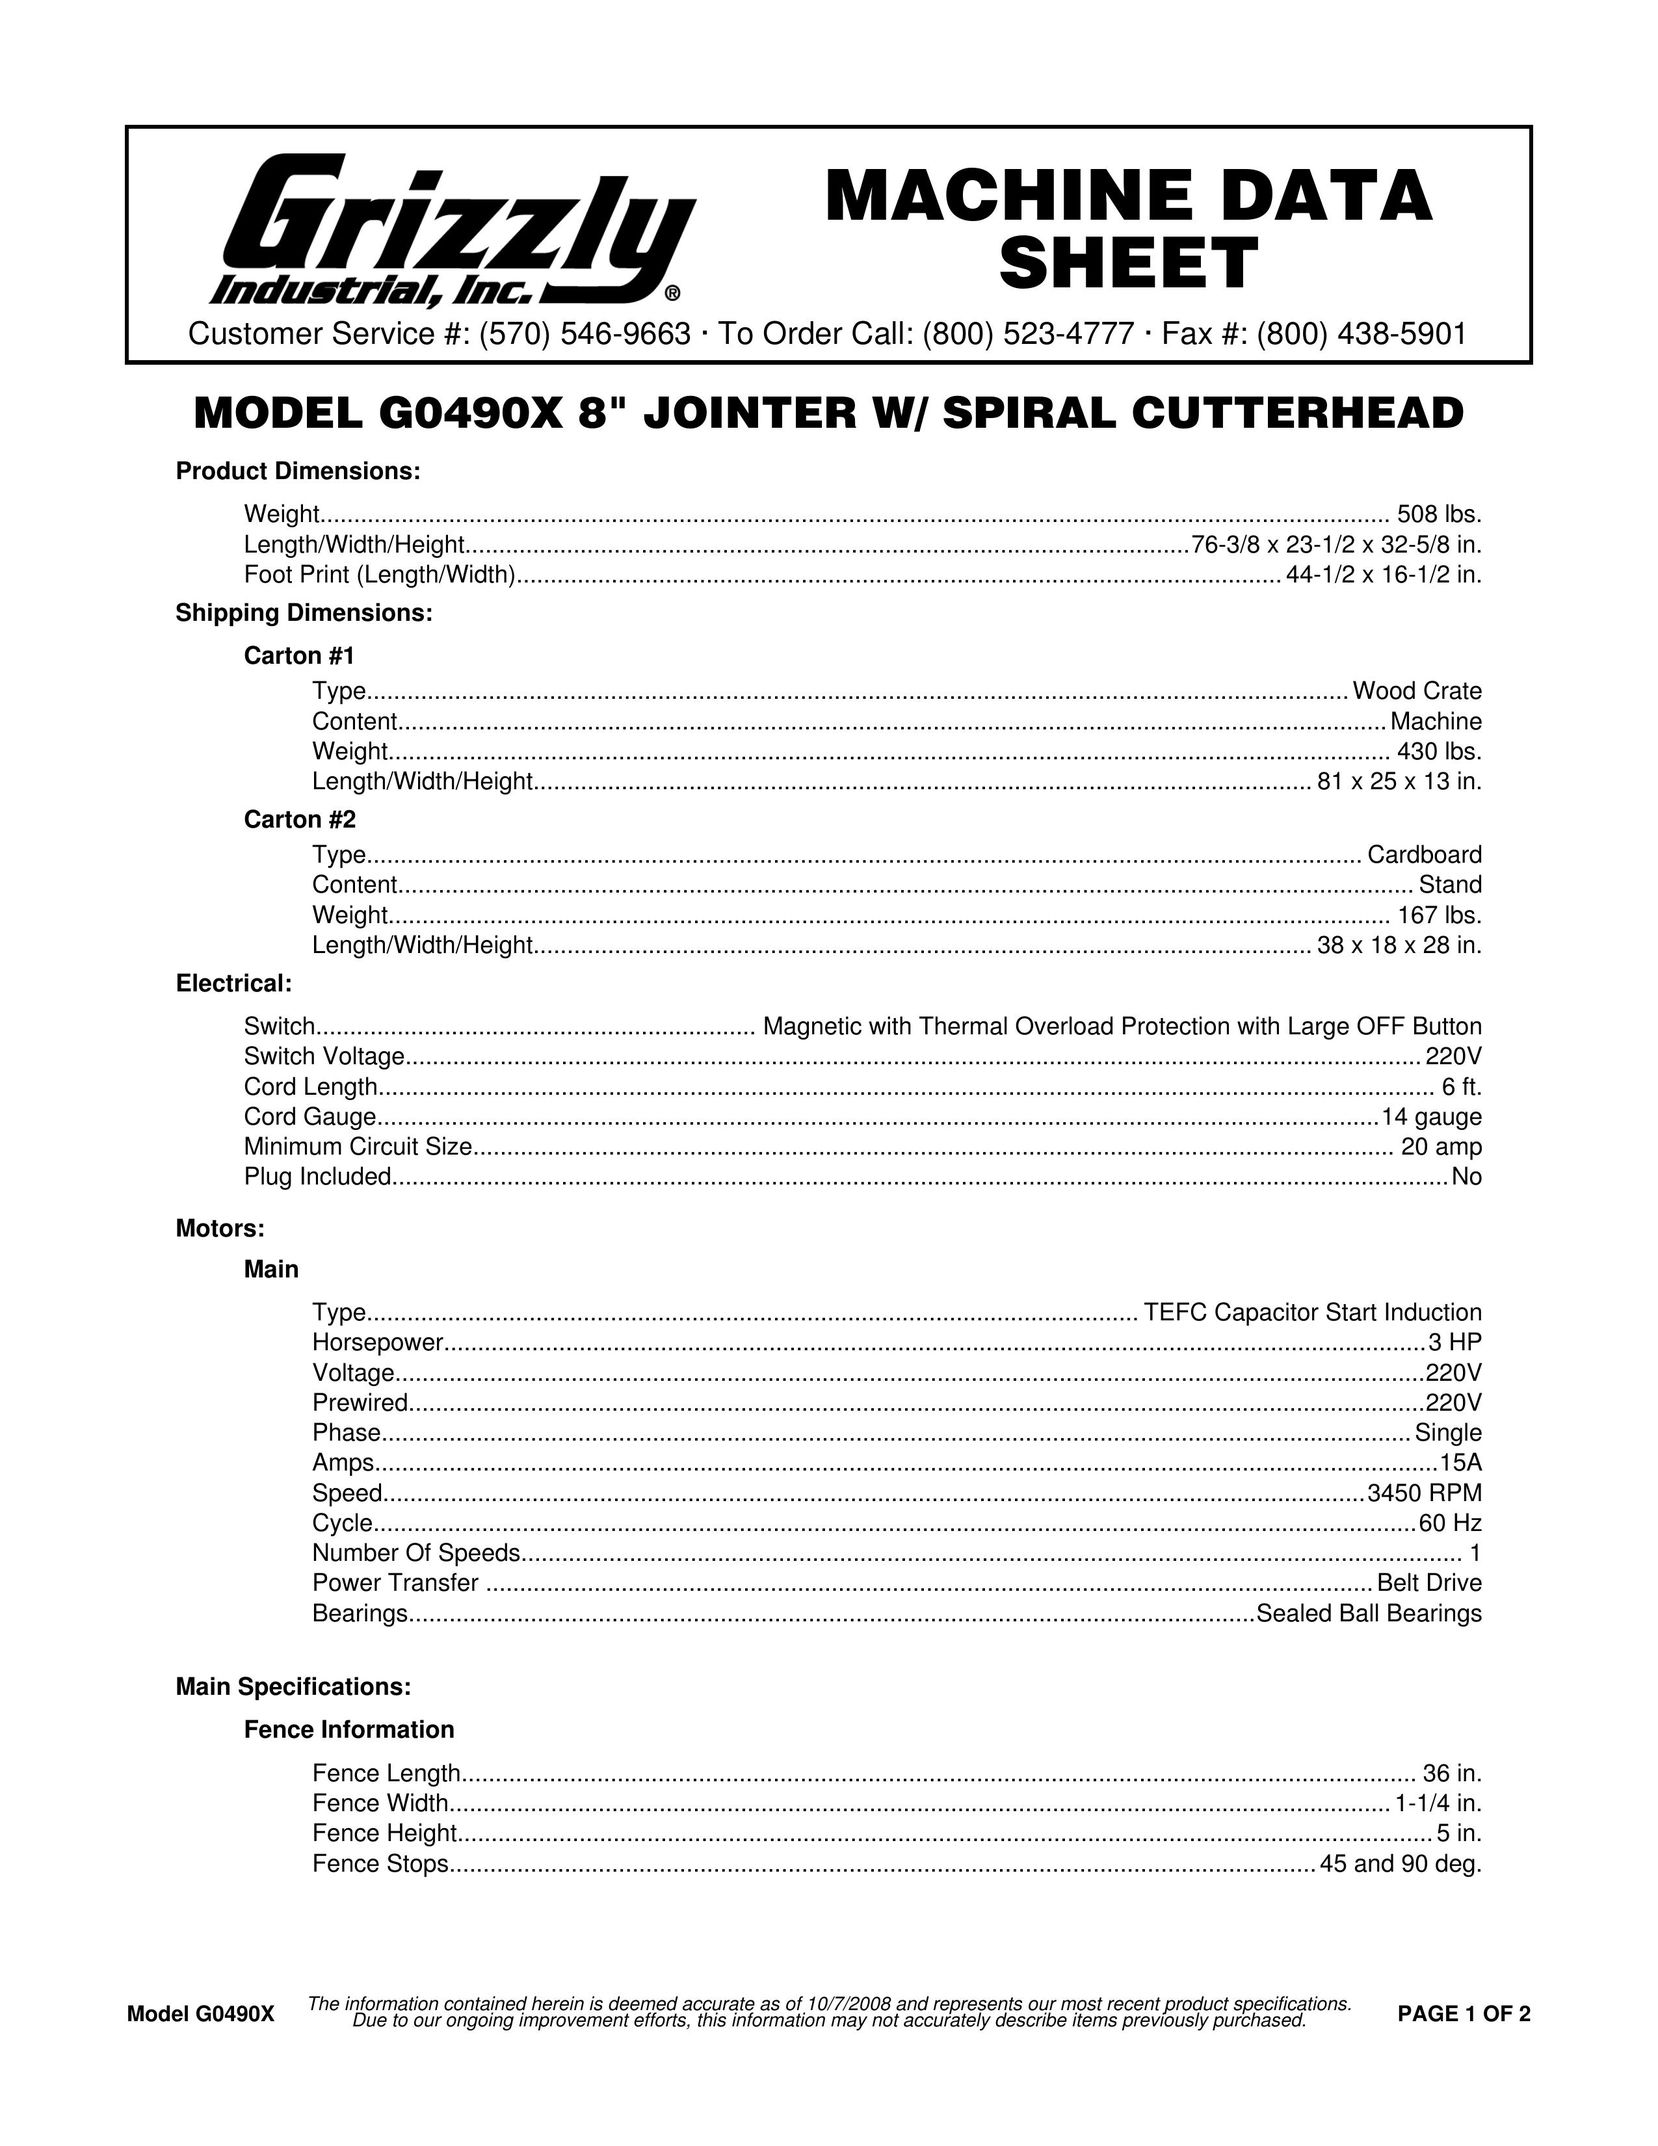 Grizzly G0490X Biscuit Joiner User Manual (Page 1)